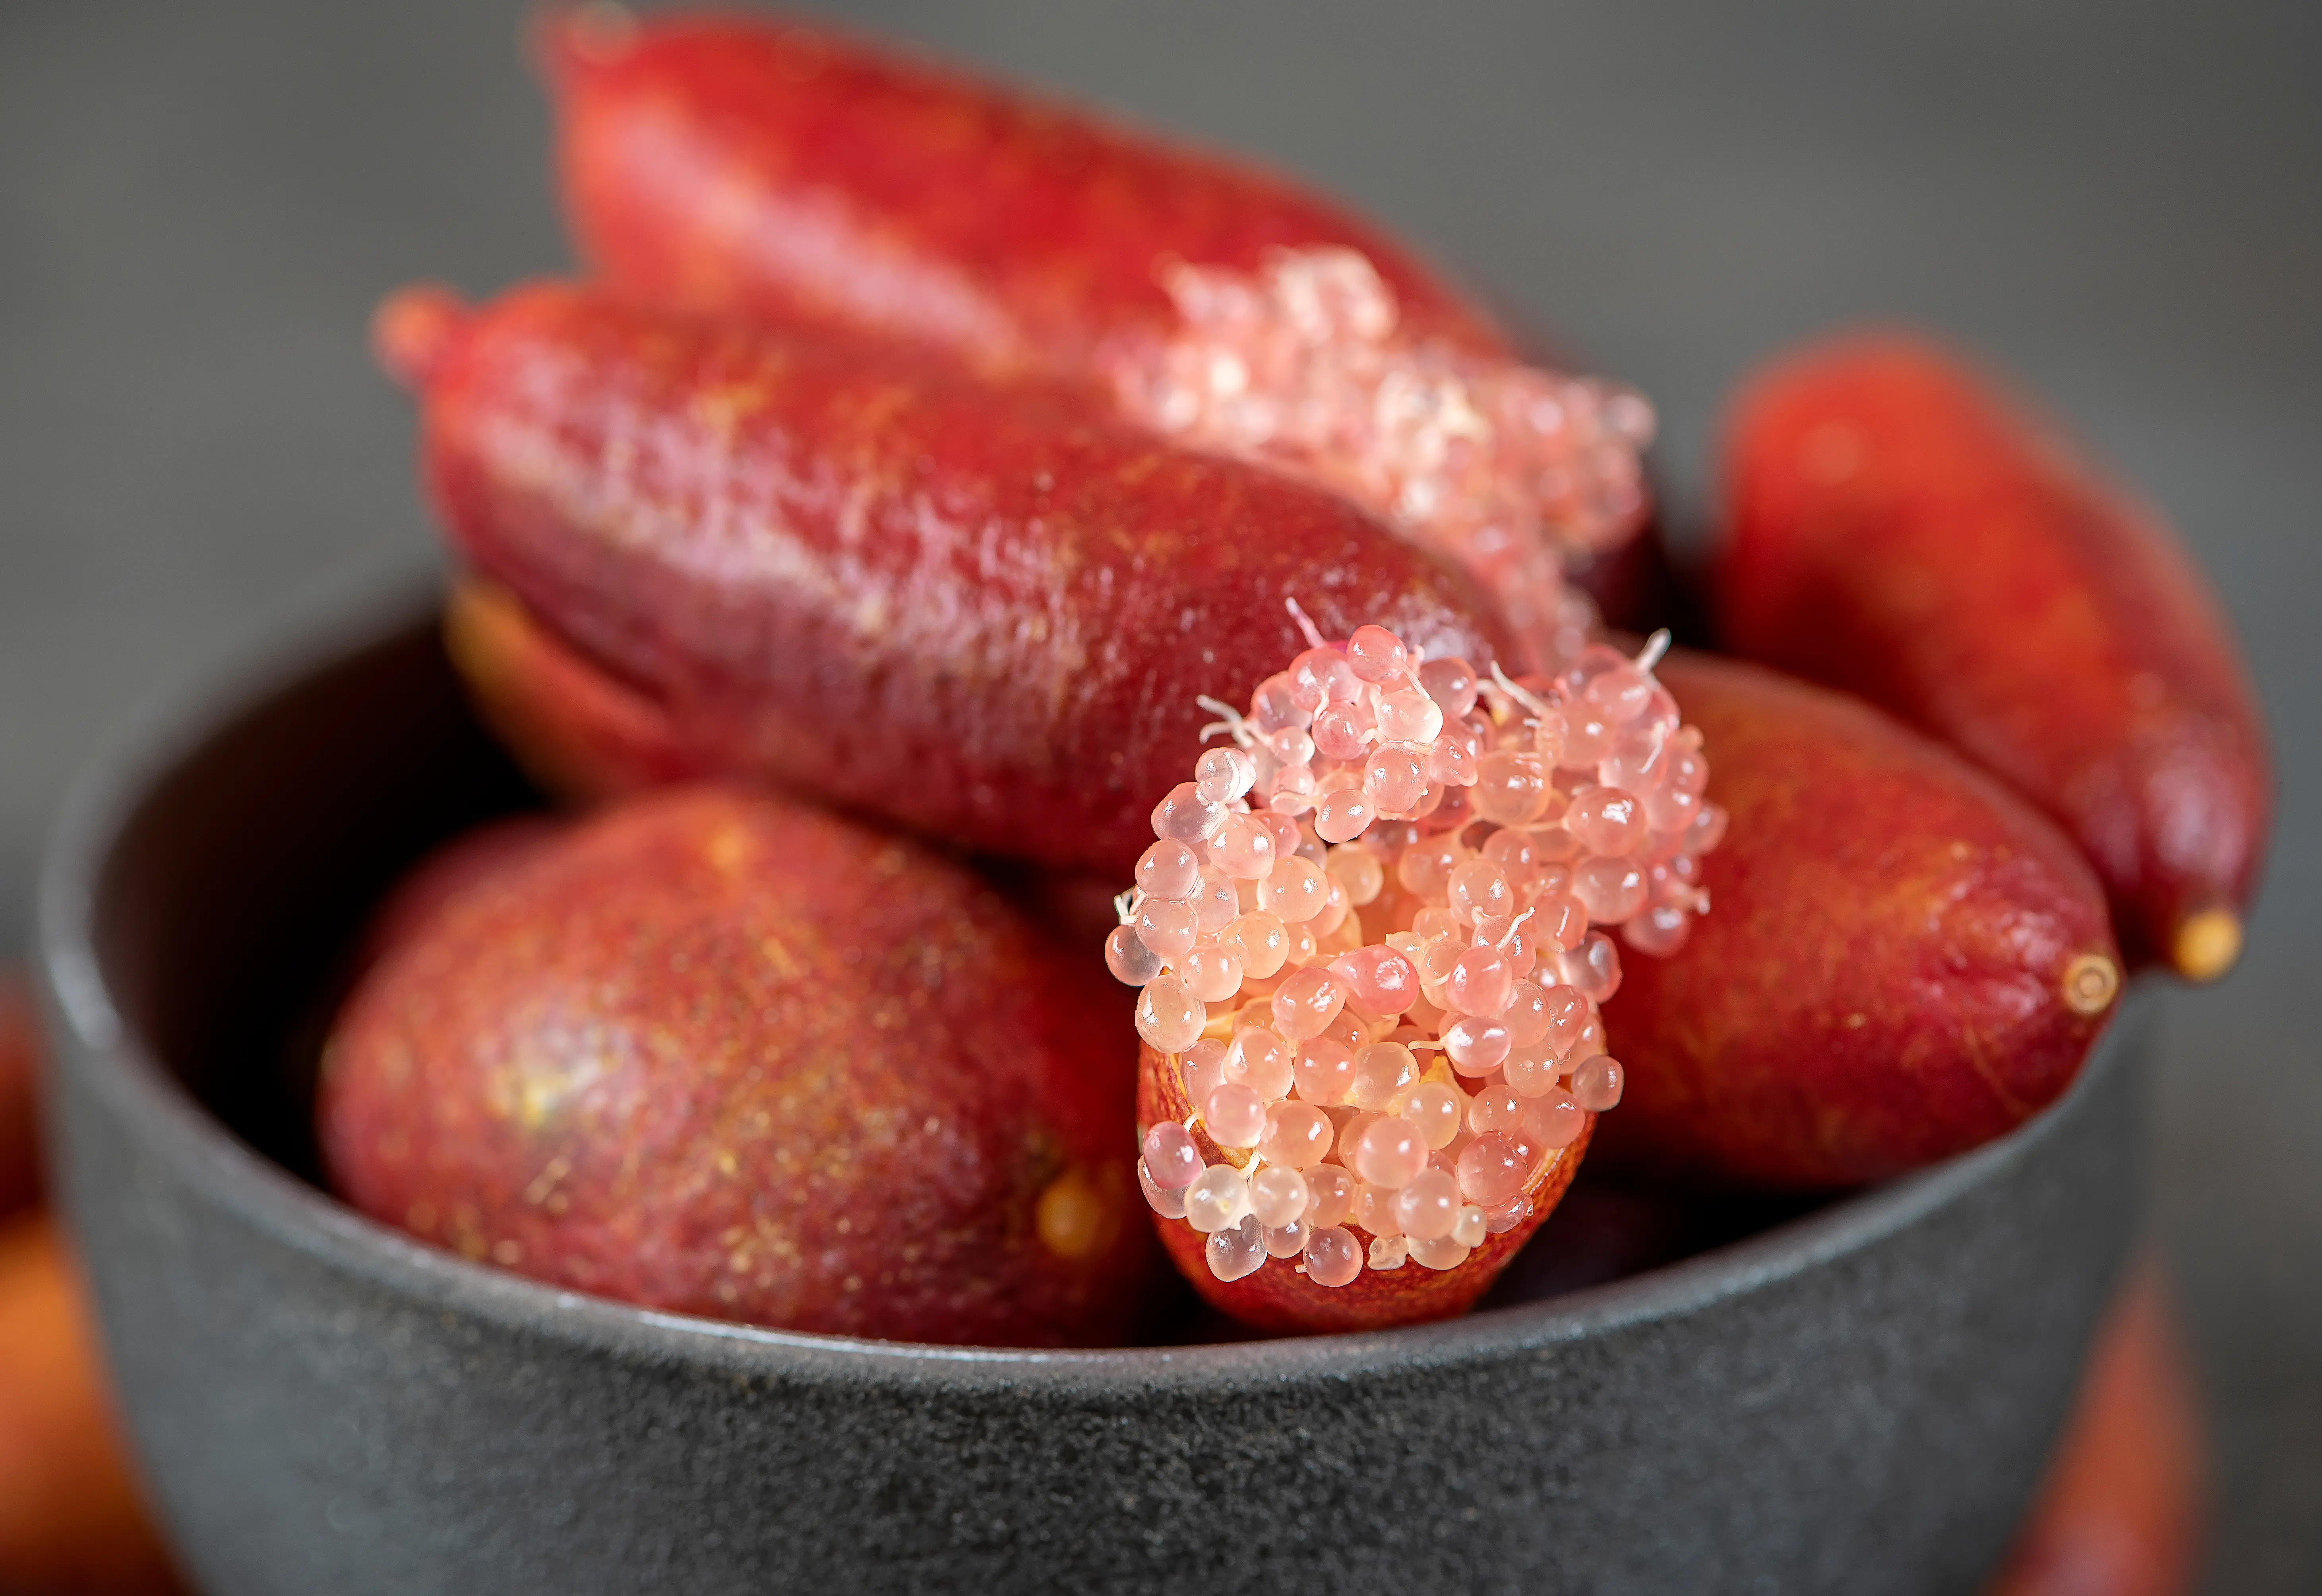 An image displaying Fingerlime fruit - the fruit depicted is red and oblong, whilst the insides look much like transparent caviar.